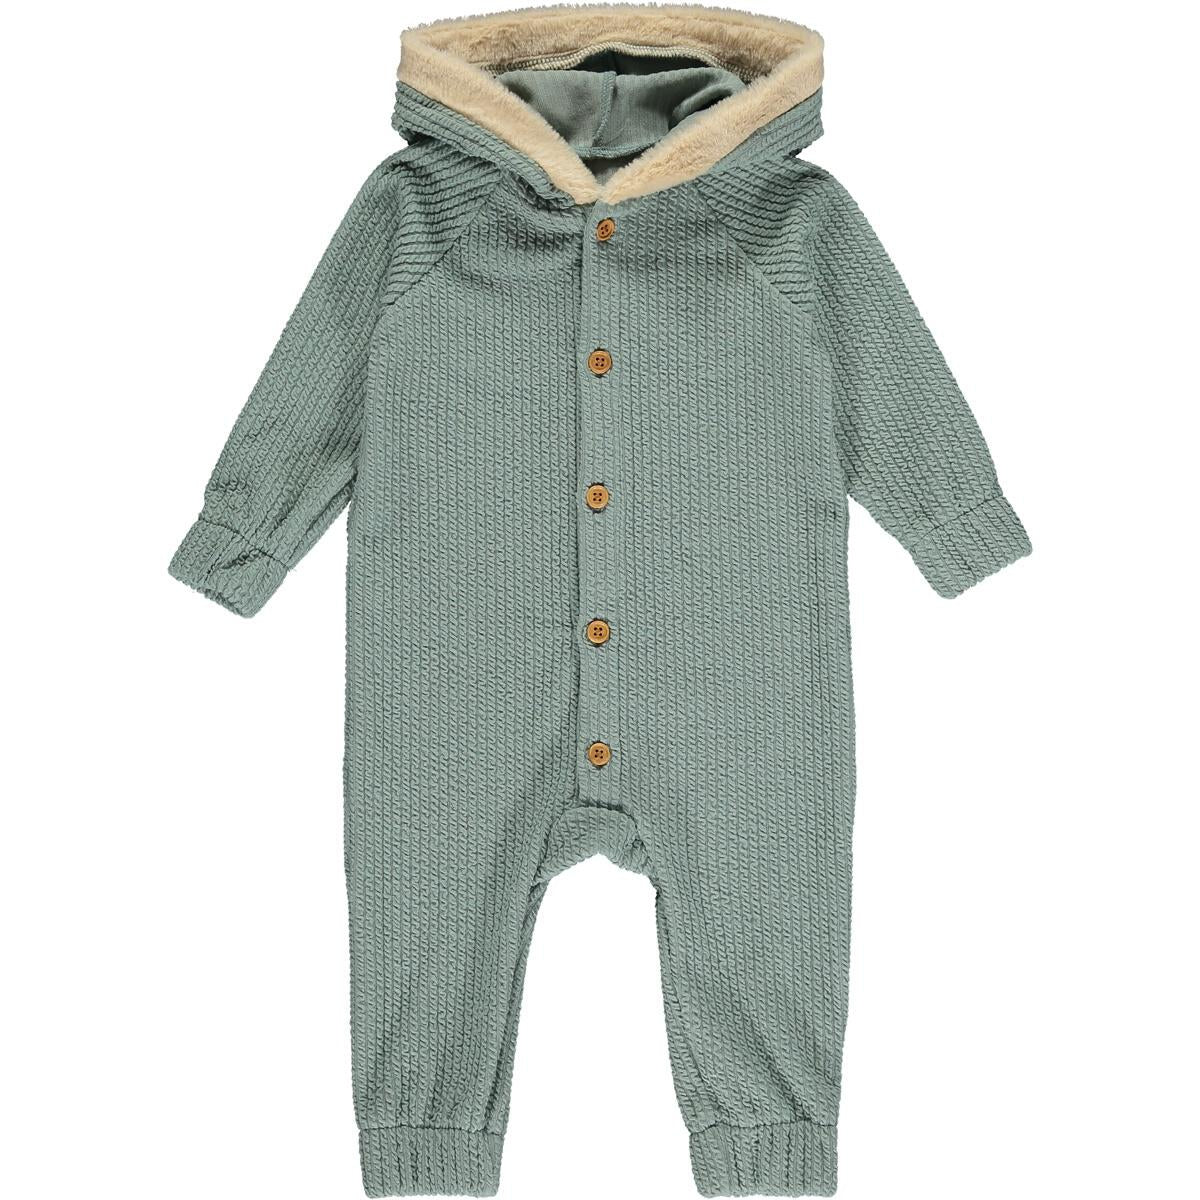 Bailey Textured Knit Hooded Romper in Sage